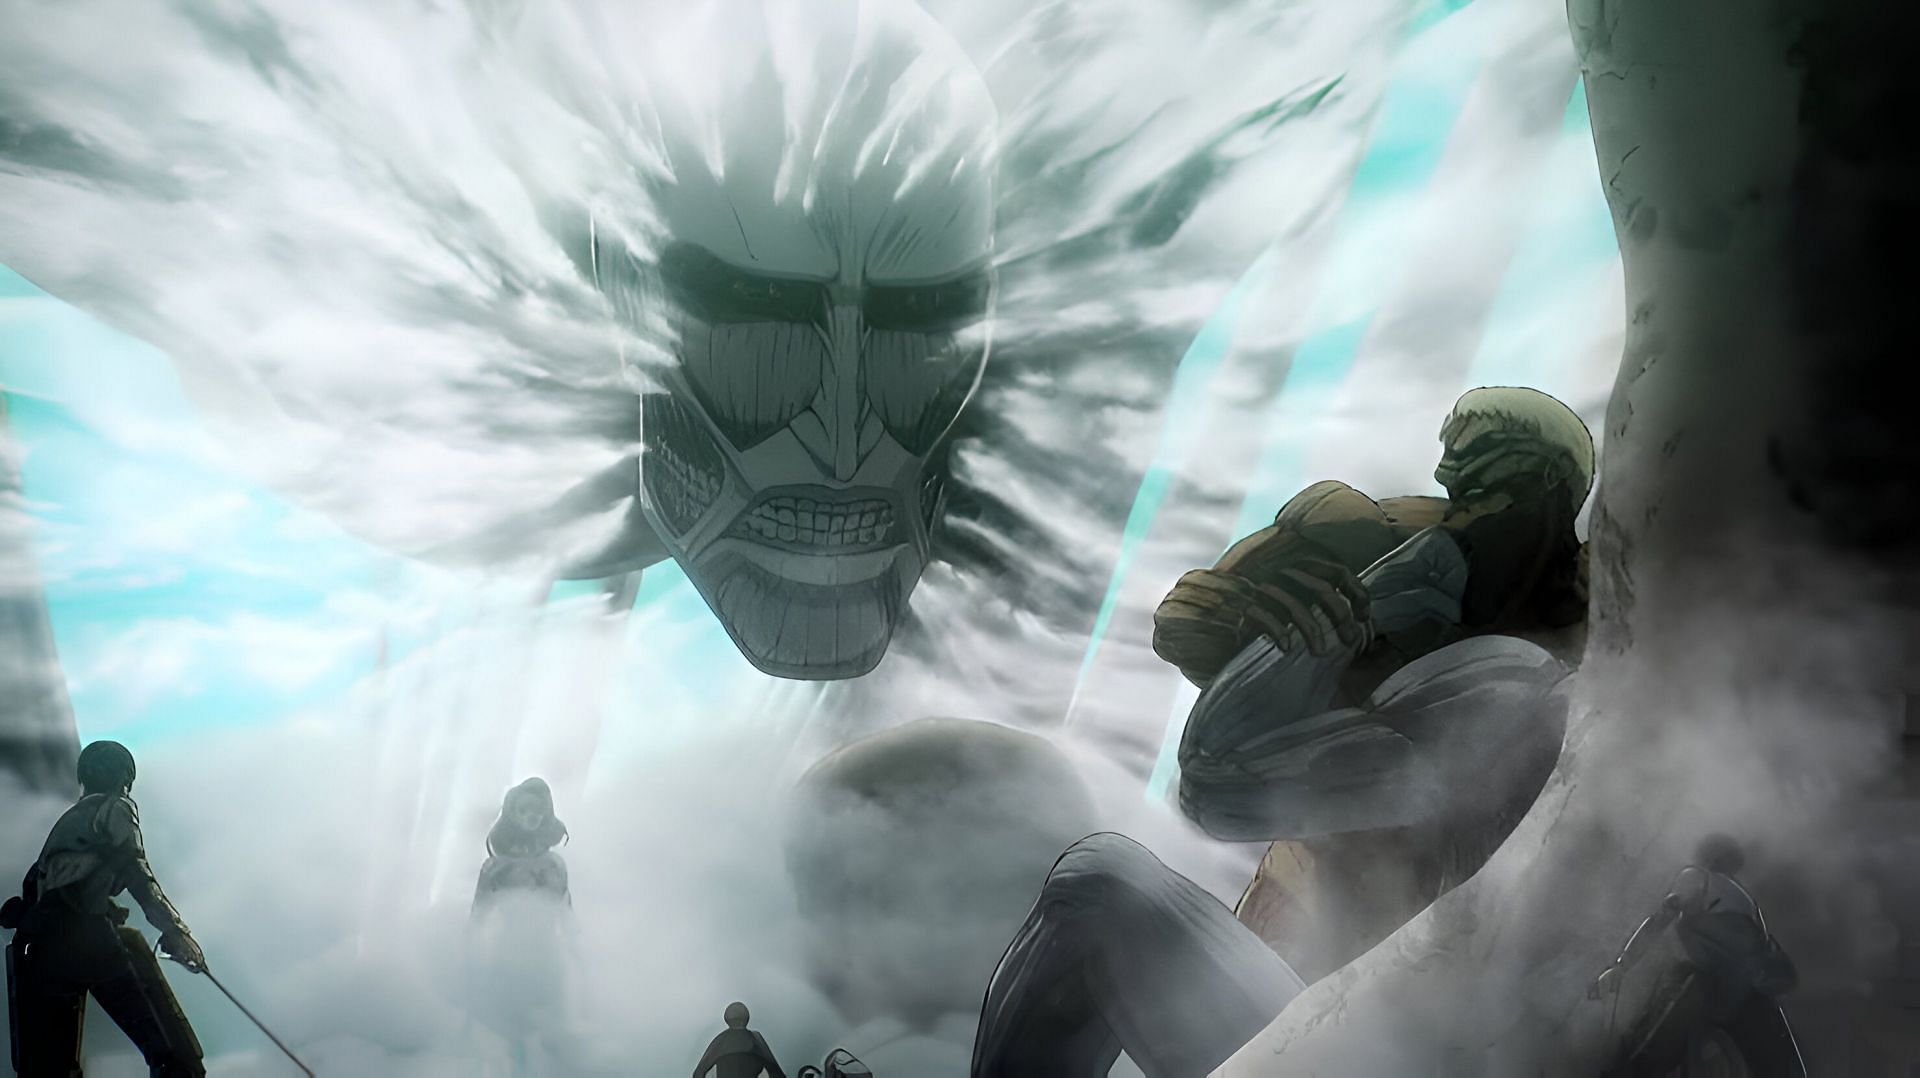 The Colossal Titan as seen in the anime (Image via MAPPA)